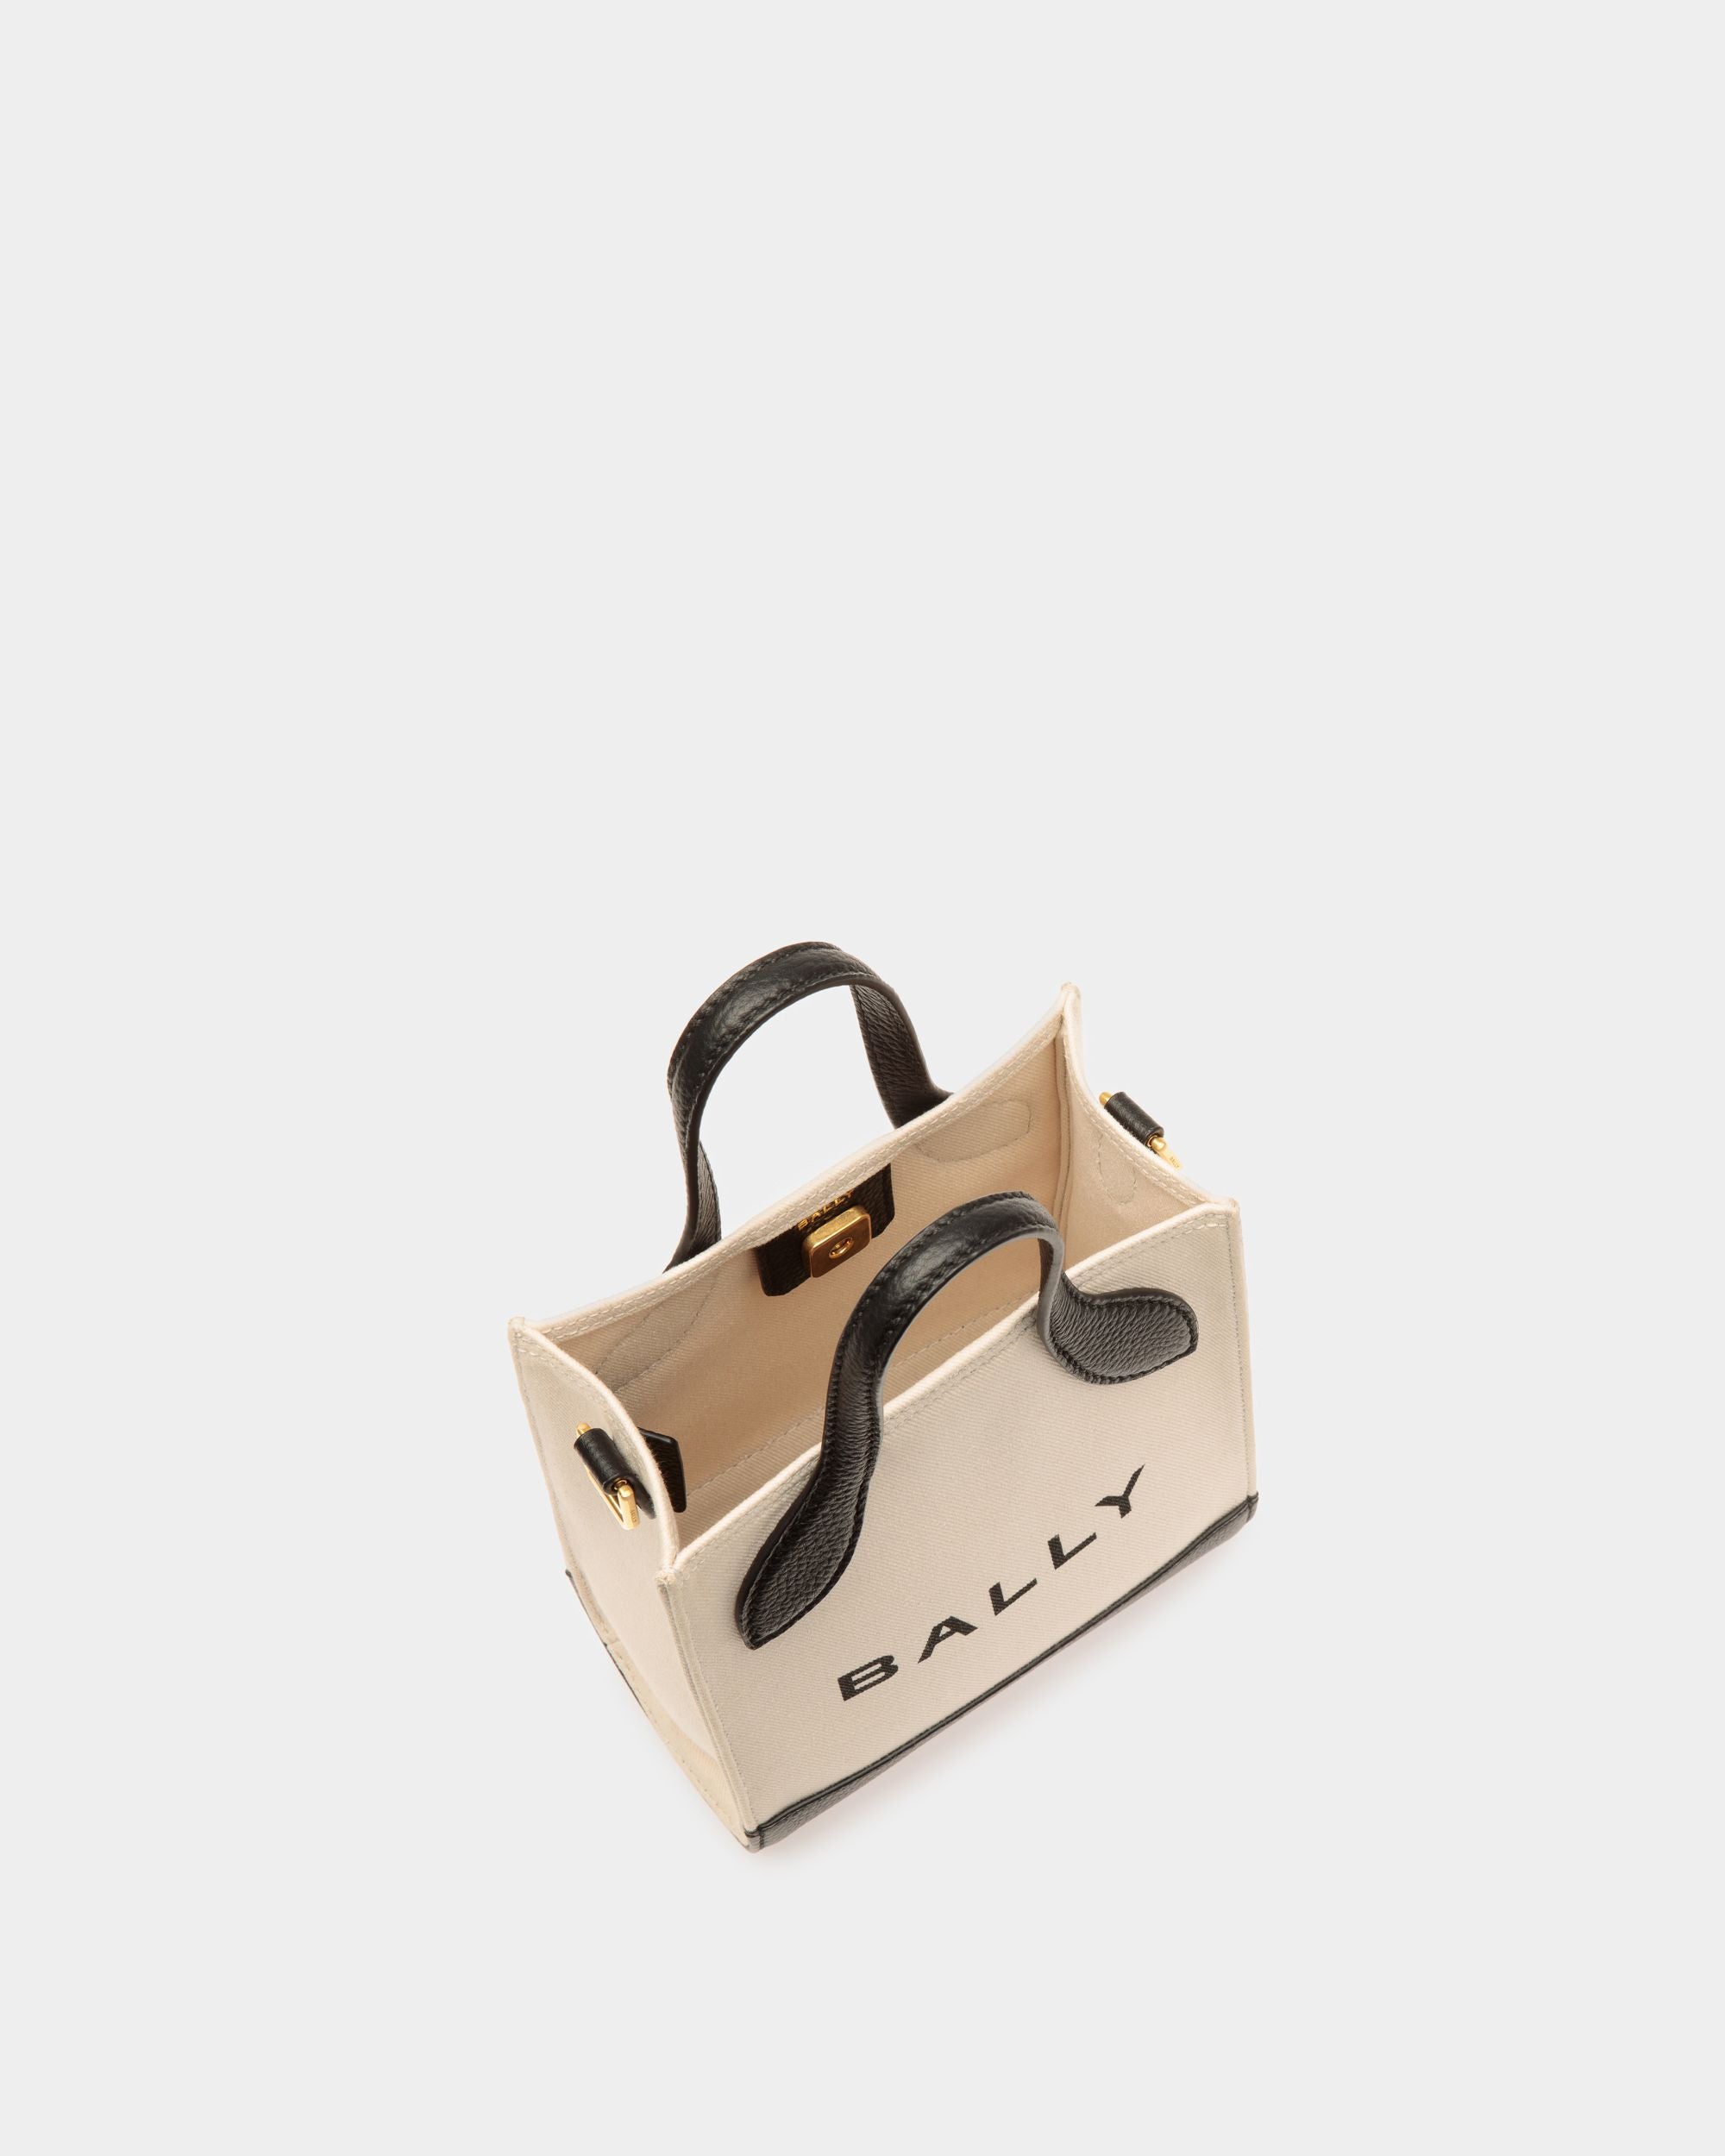 Bar | Women's Mini Tote Bag in Neutral And Black Canvas And Leather | Bally | Still Life Open / Inside